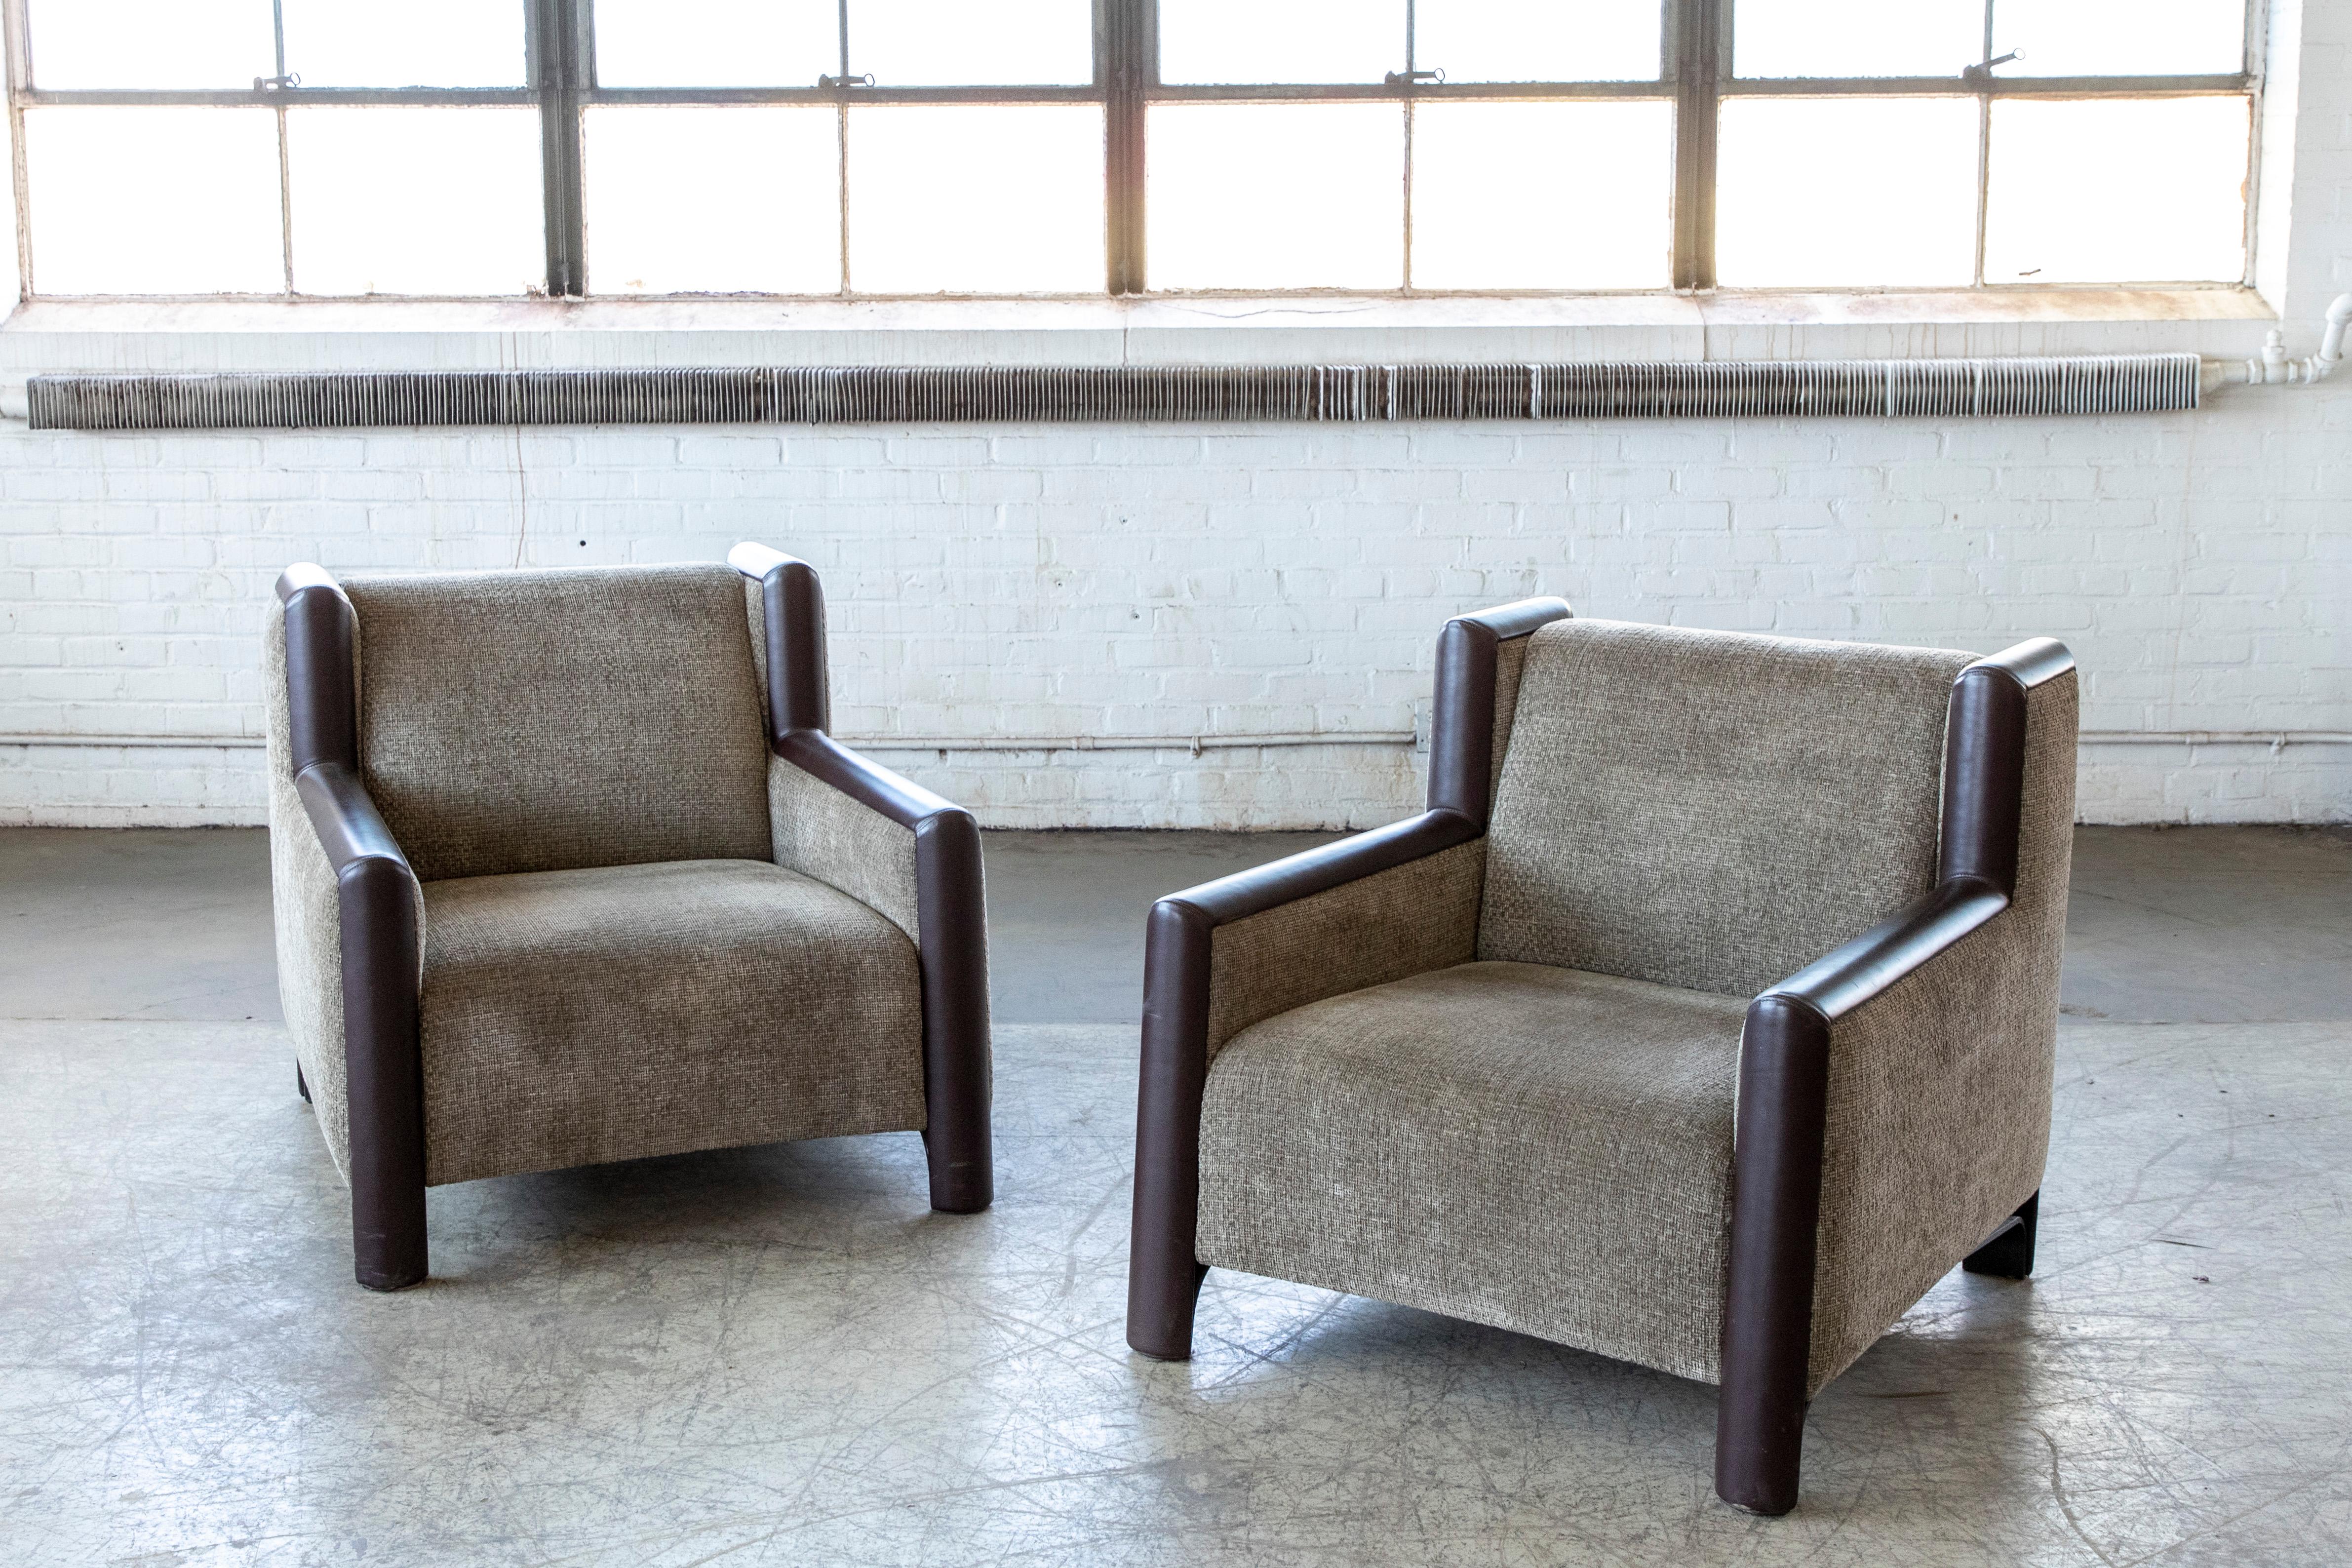 Modern Italian Club or Lounge Chairs in Leather and Wool 1980's by Romeo Sozzi